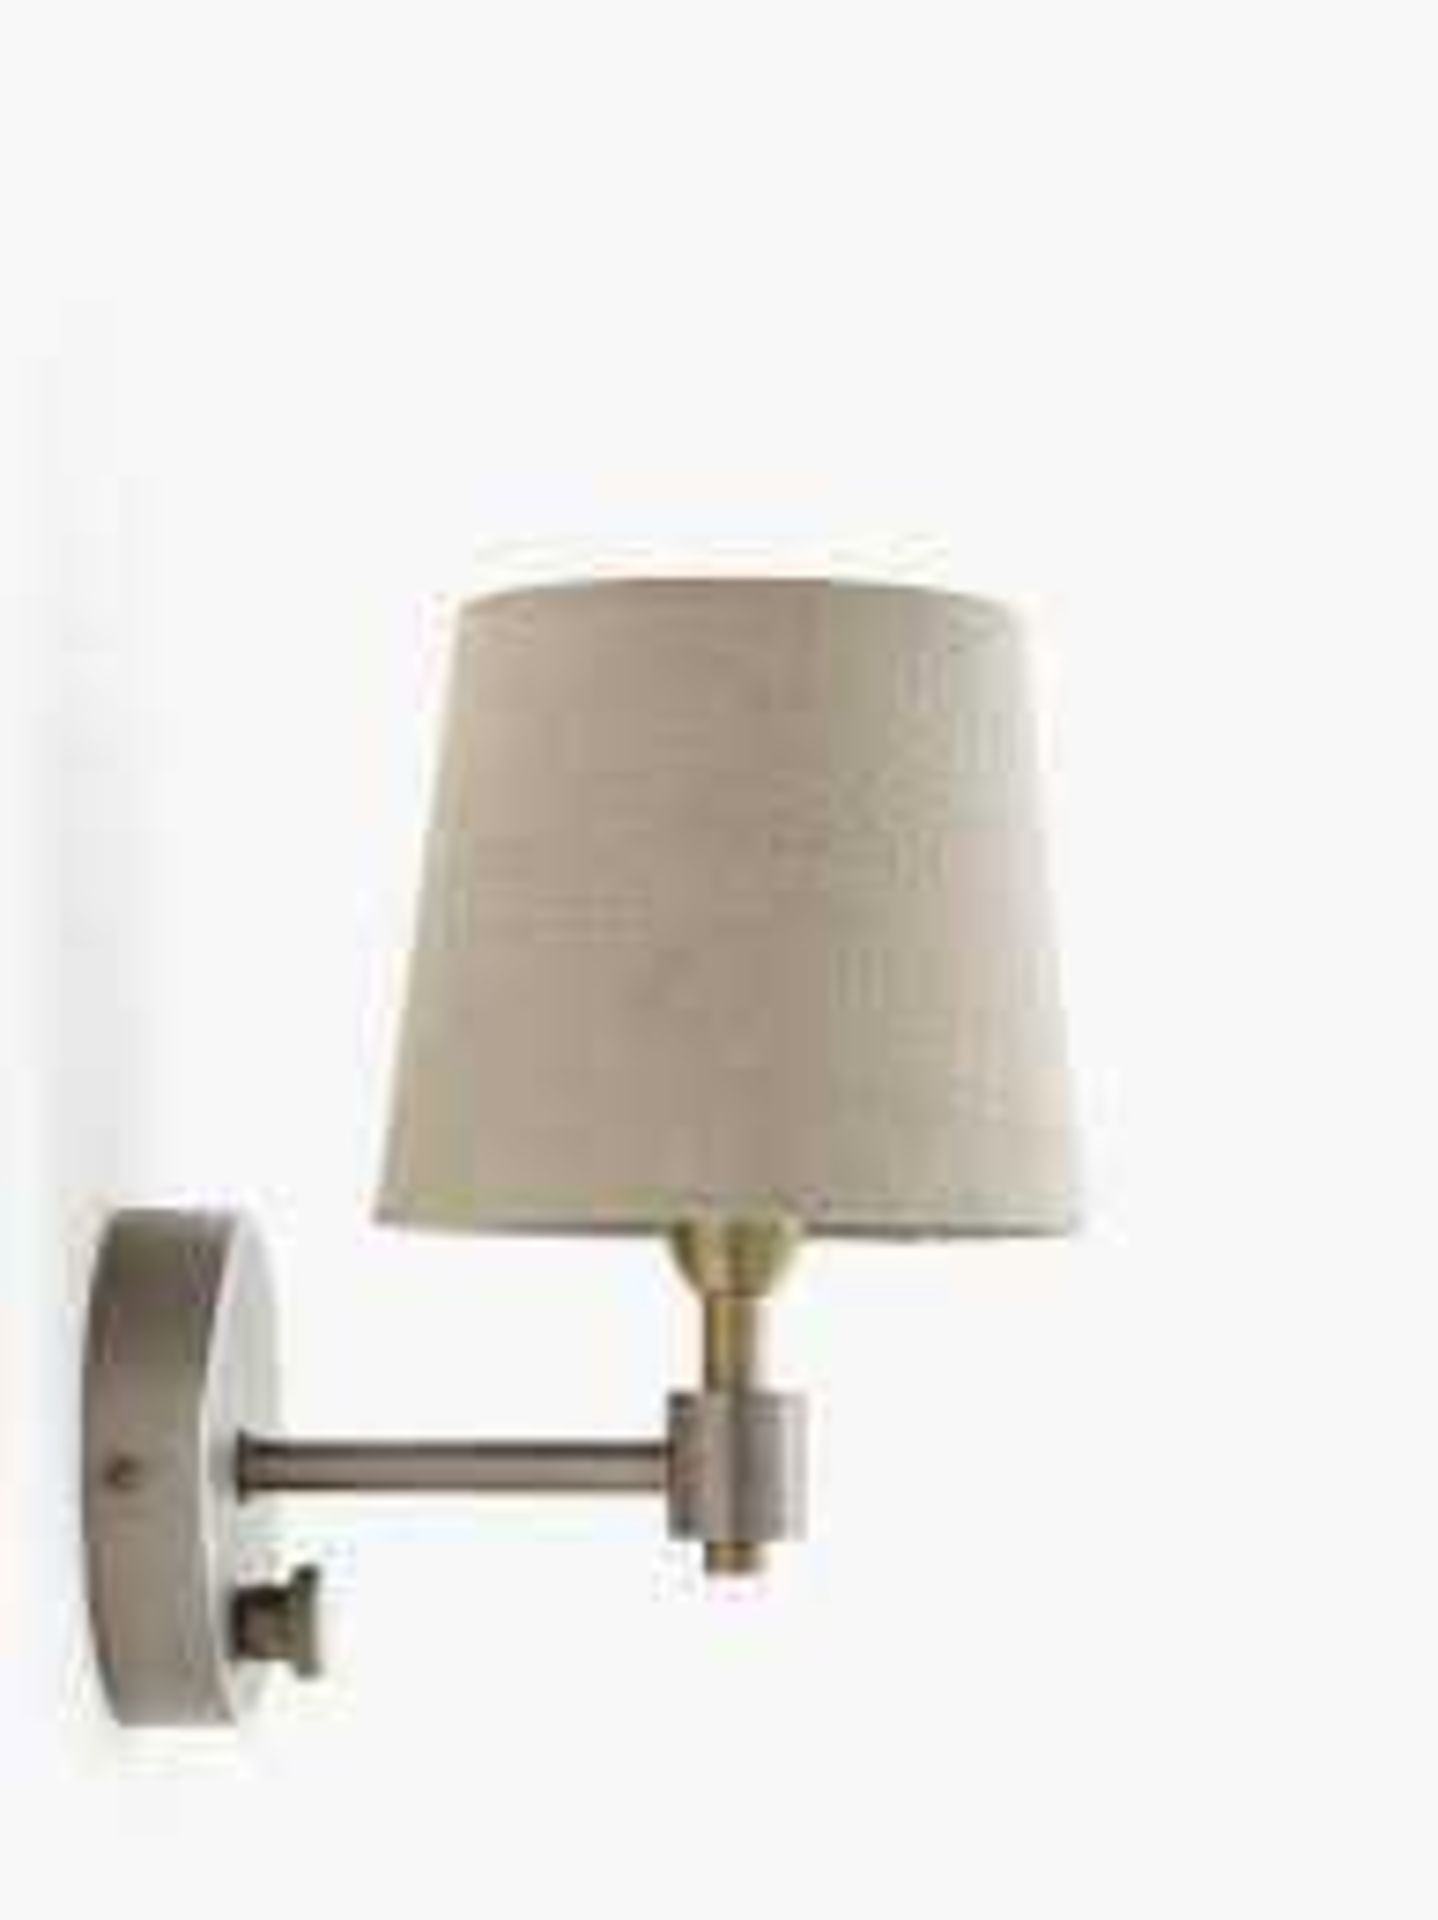 Rrp £55 Each Assorted John Lewis Lights To Include Kitchen Spotlight And Ansell Wall Light And Olbia - Image 4 of 4